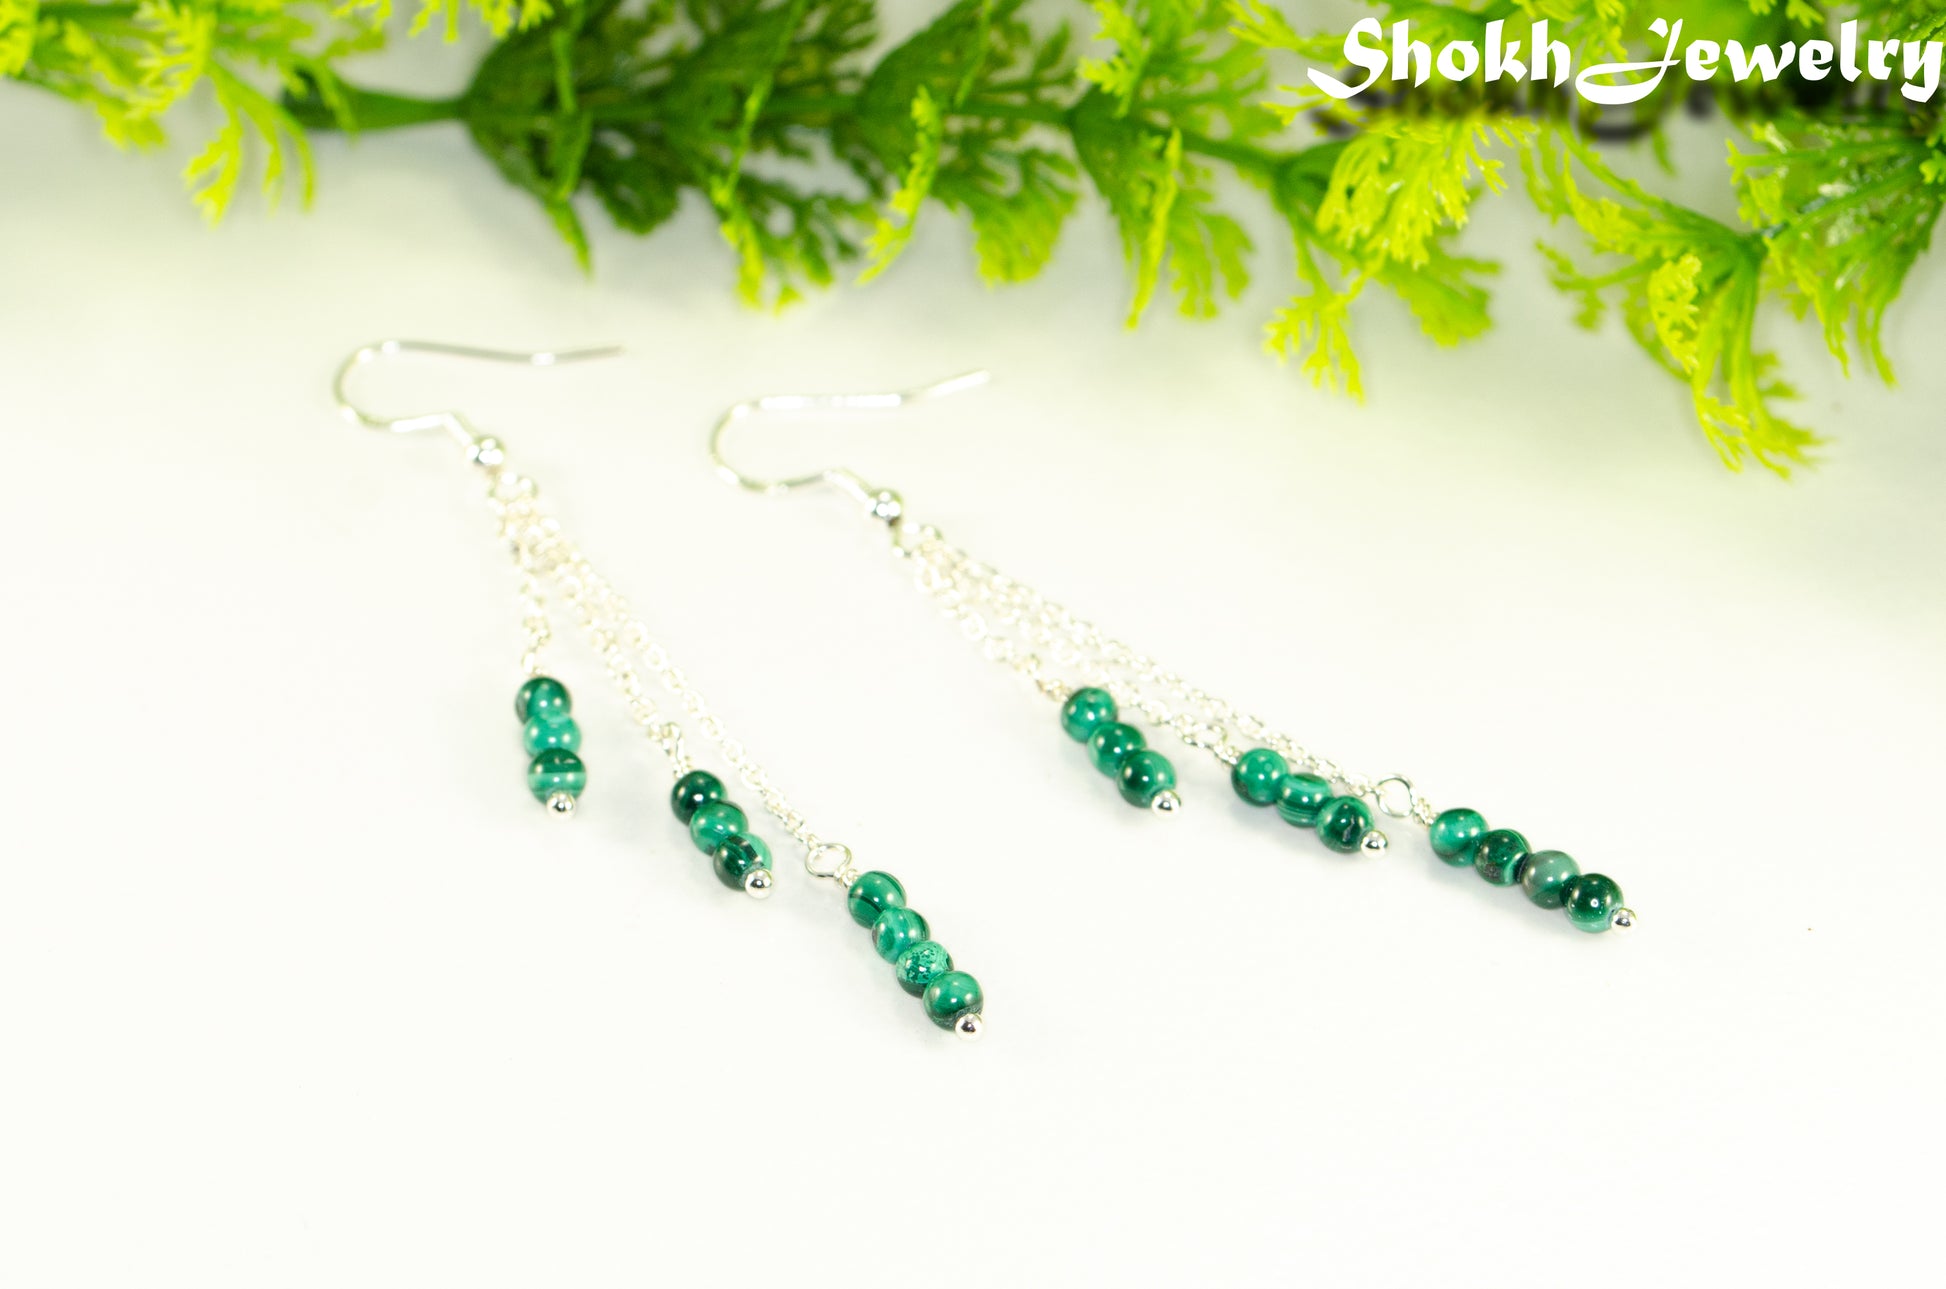 Silver Plated Chain and Malachite Stone Earrings.